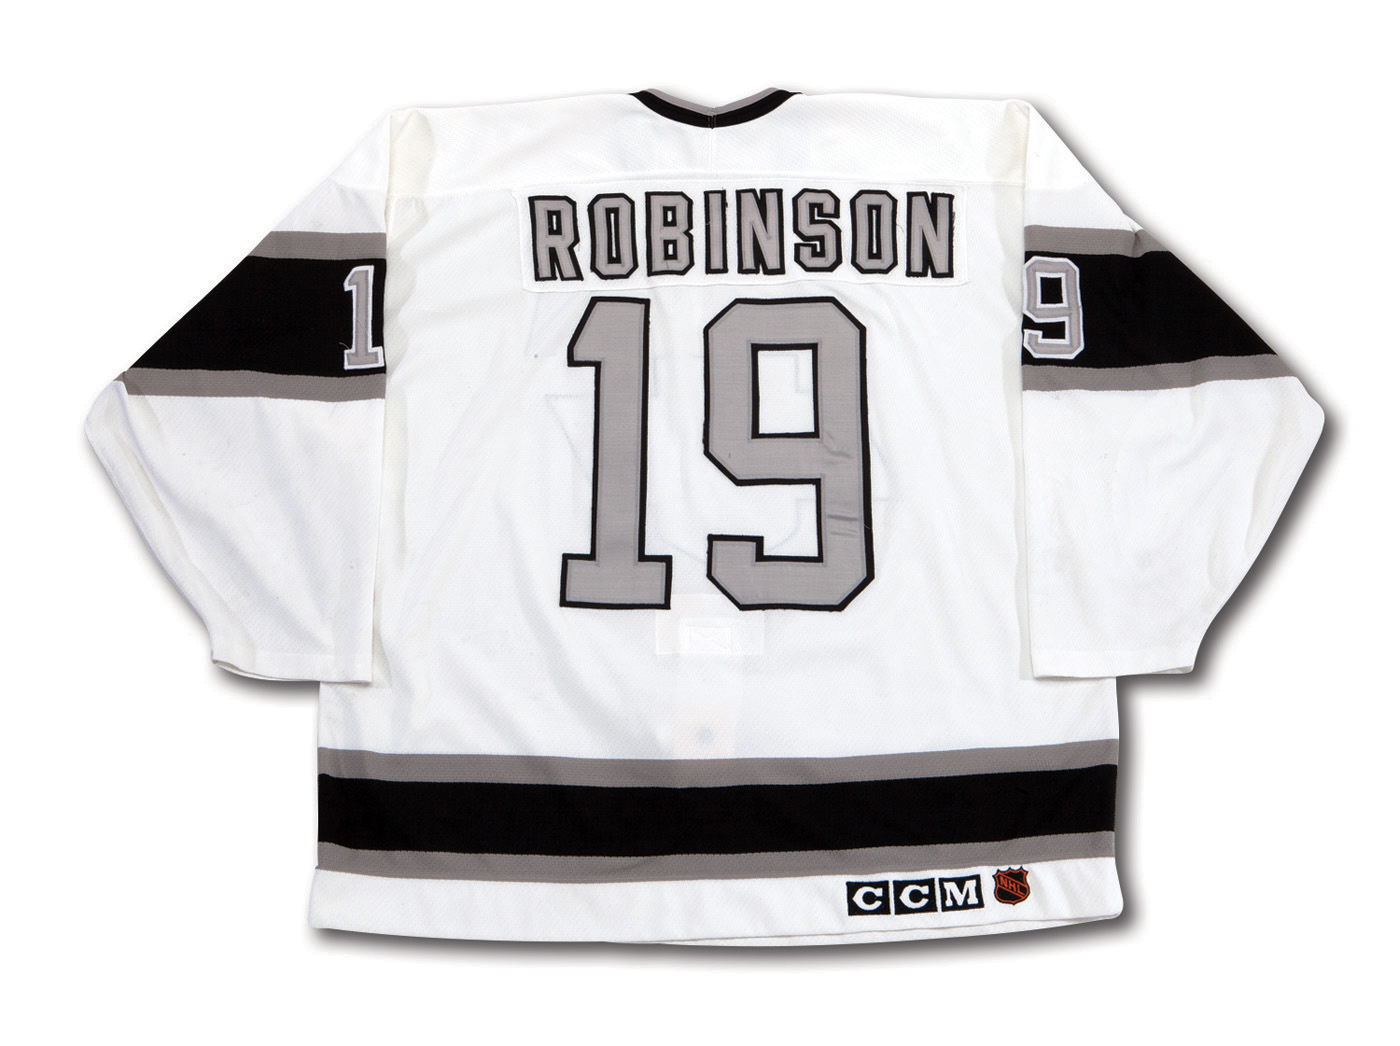 1991-92 Larry Robinson NHL All Star Game Worn Jersey